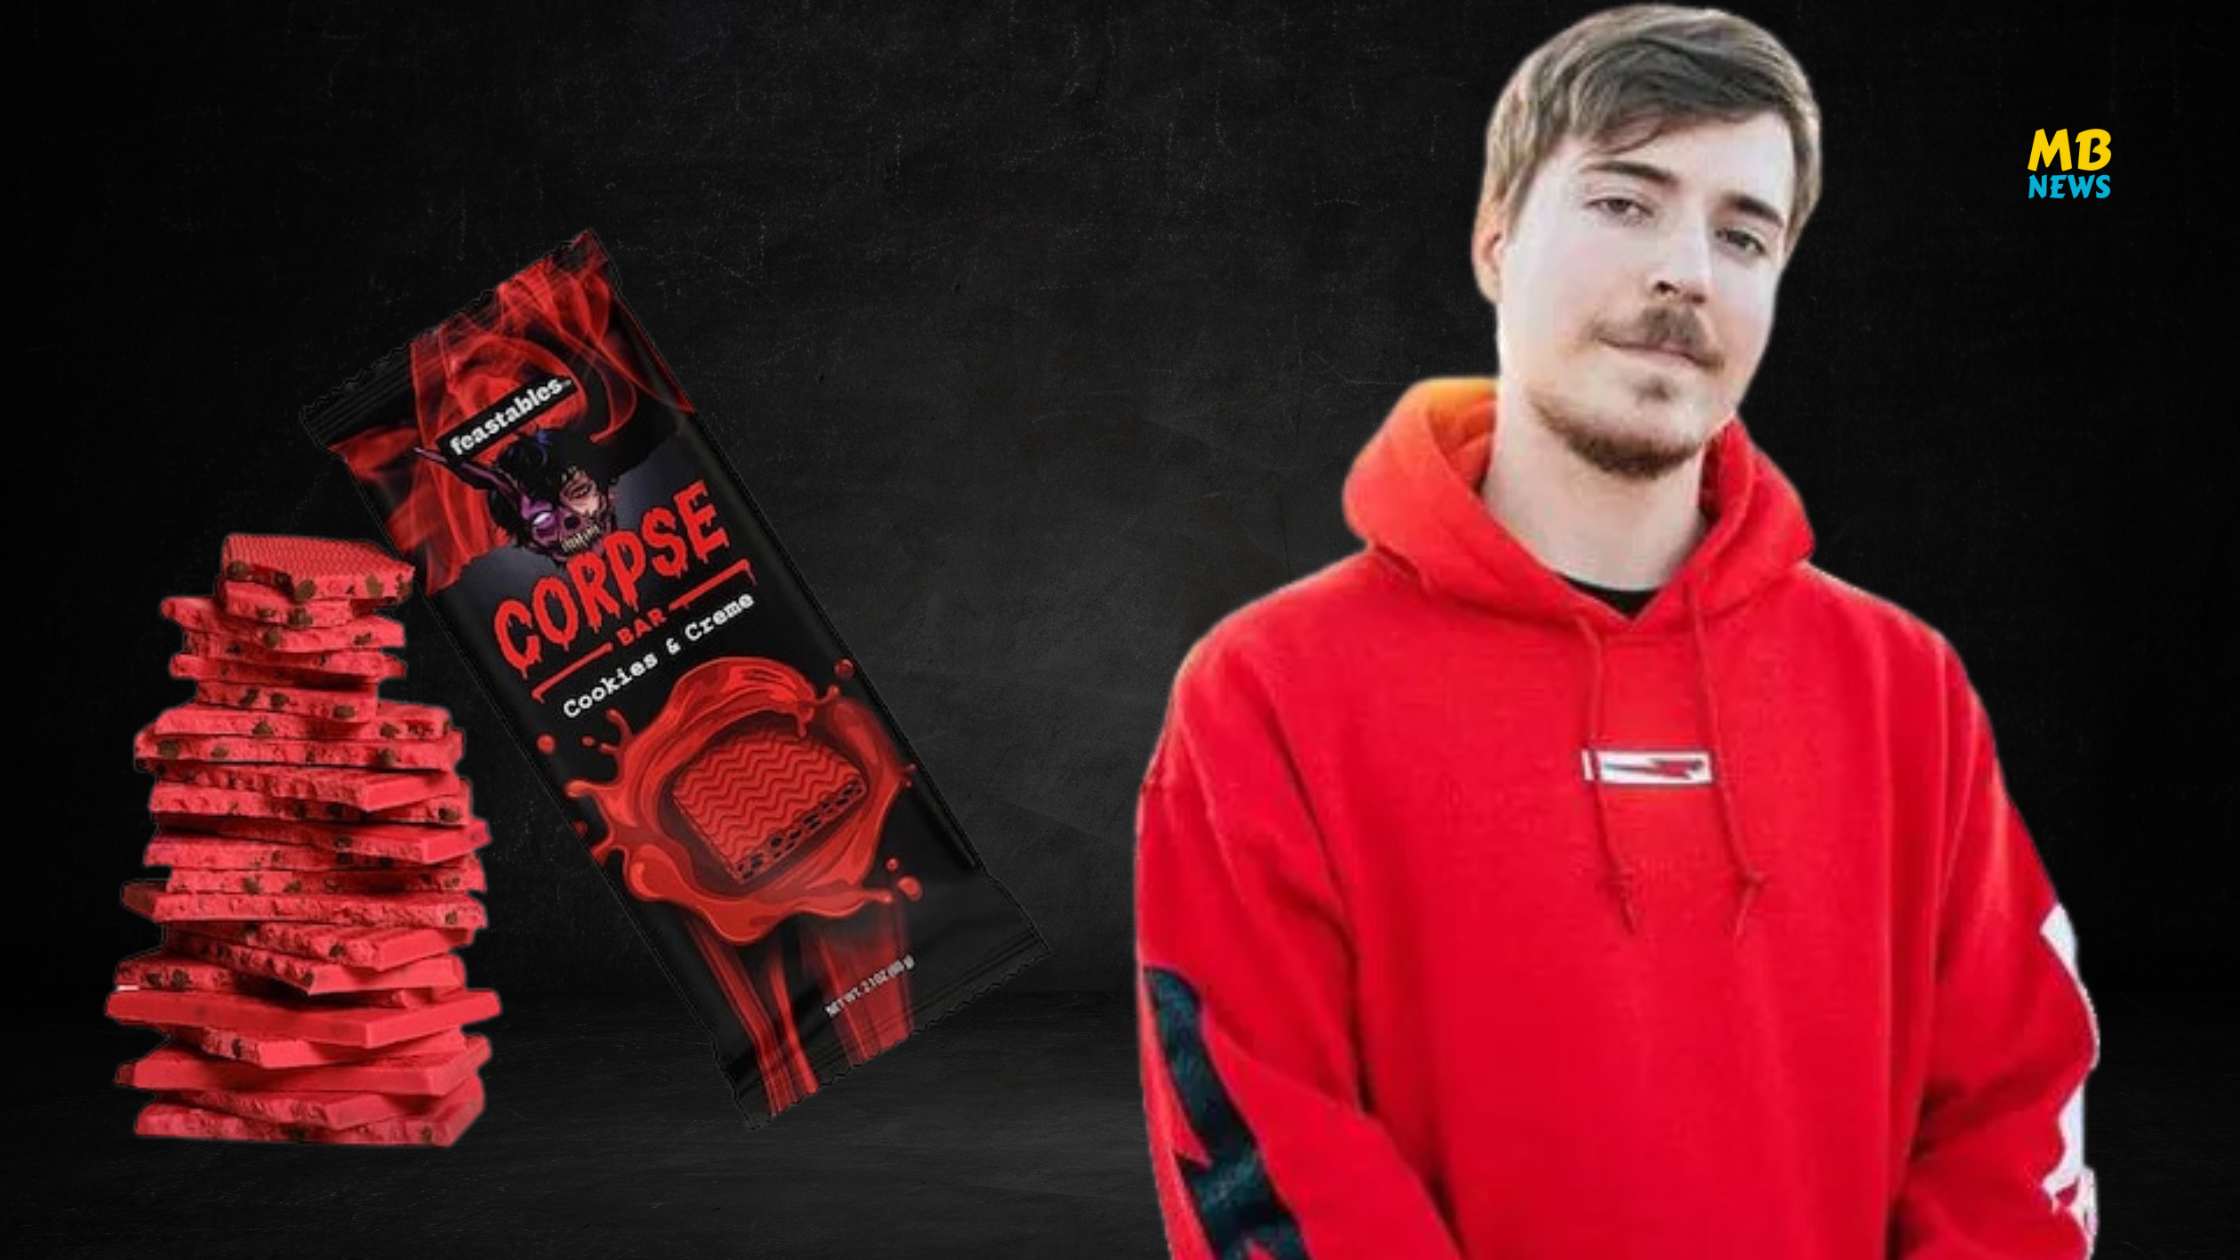 MrBeast's 'Corpse Chocolate Bar' - A Delicious Feastables Review!